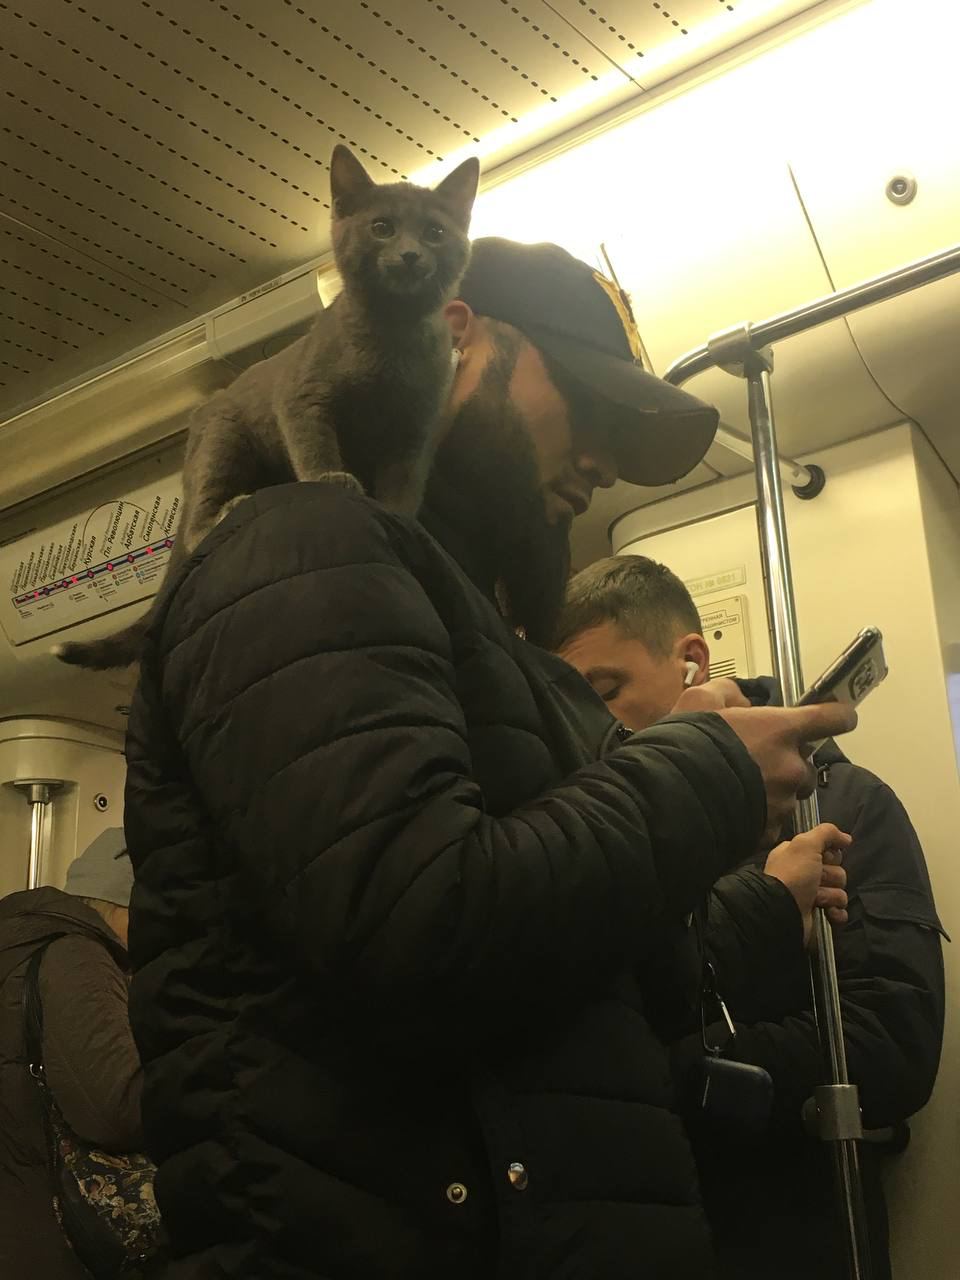 Strange People In The Subway, part 29